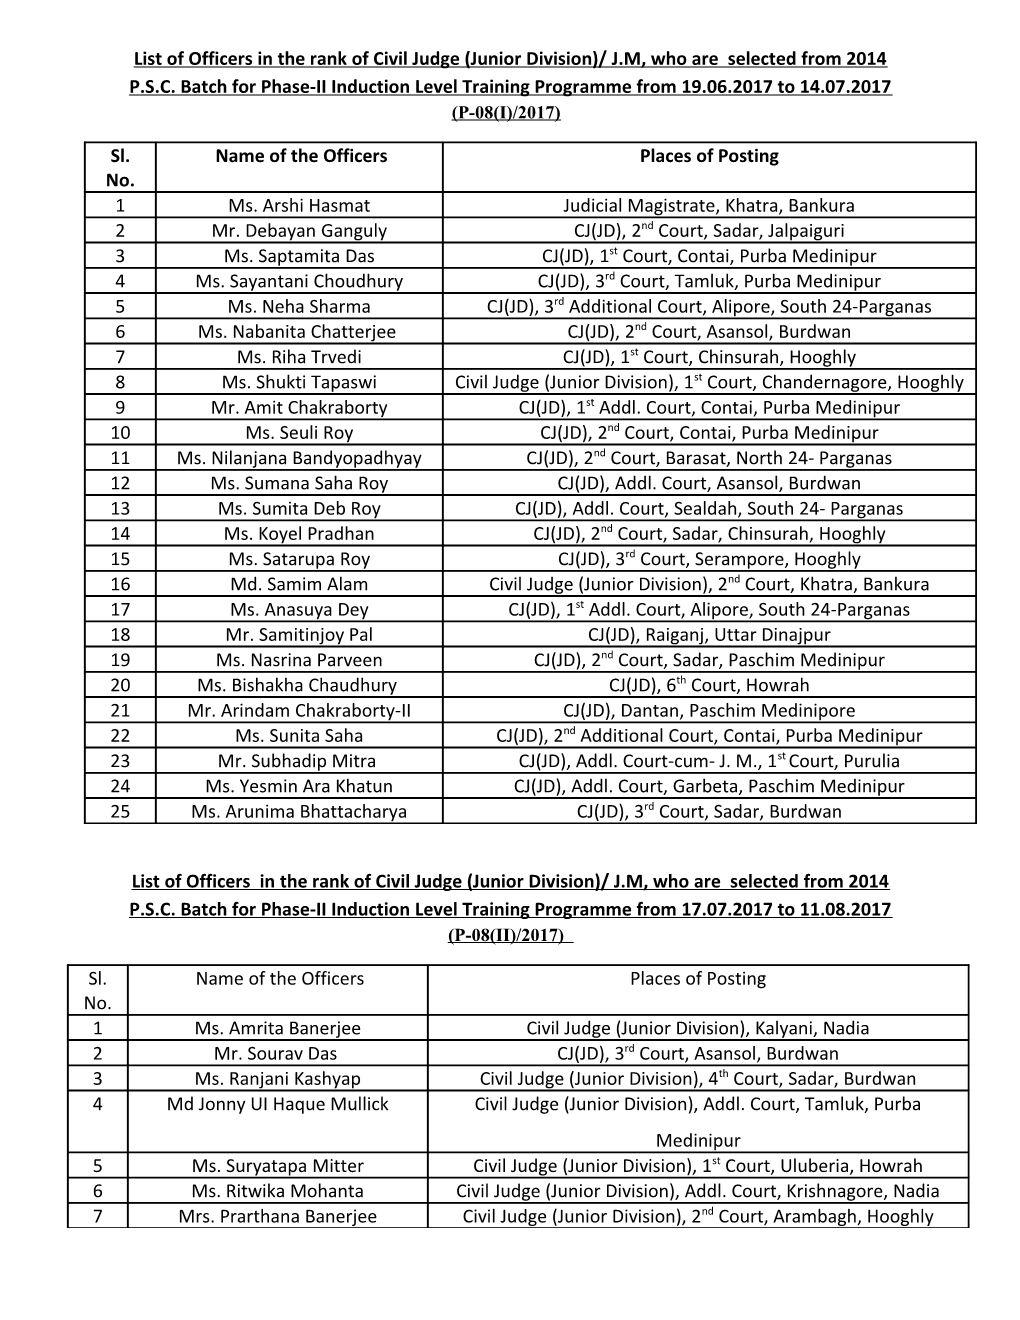 List of Officers in the Rank of Civil Judge (Junior Division)/ J.M, Who Are Selected From